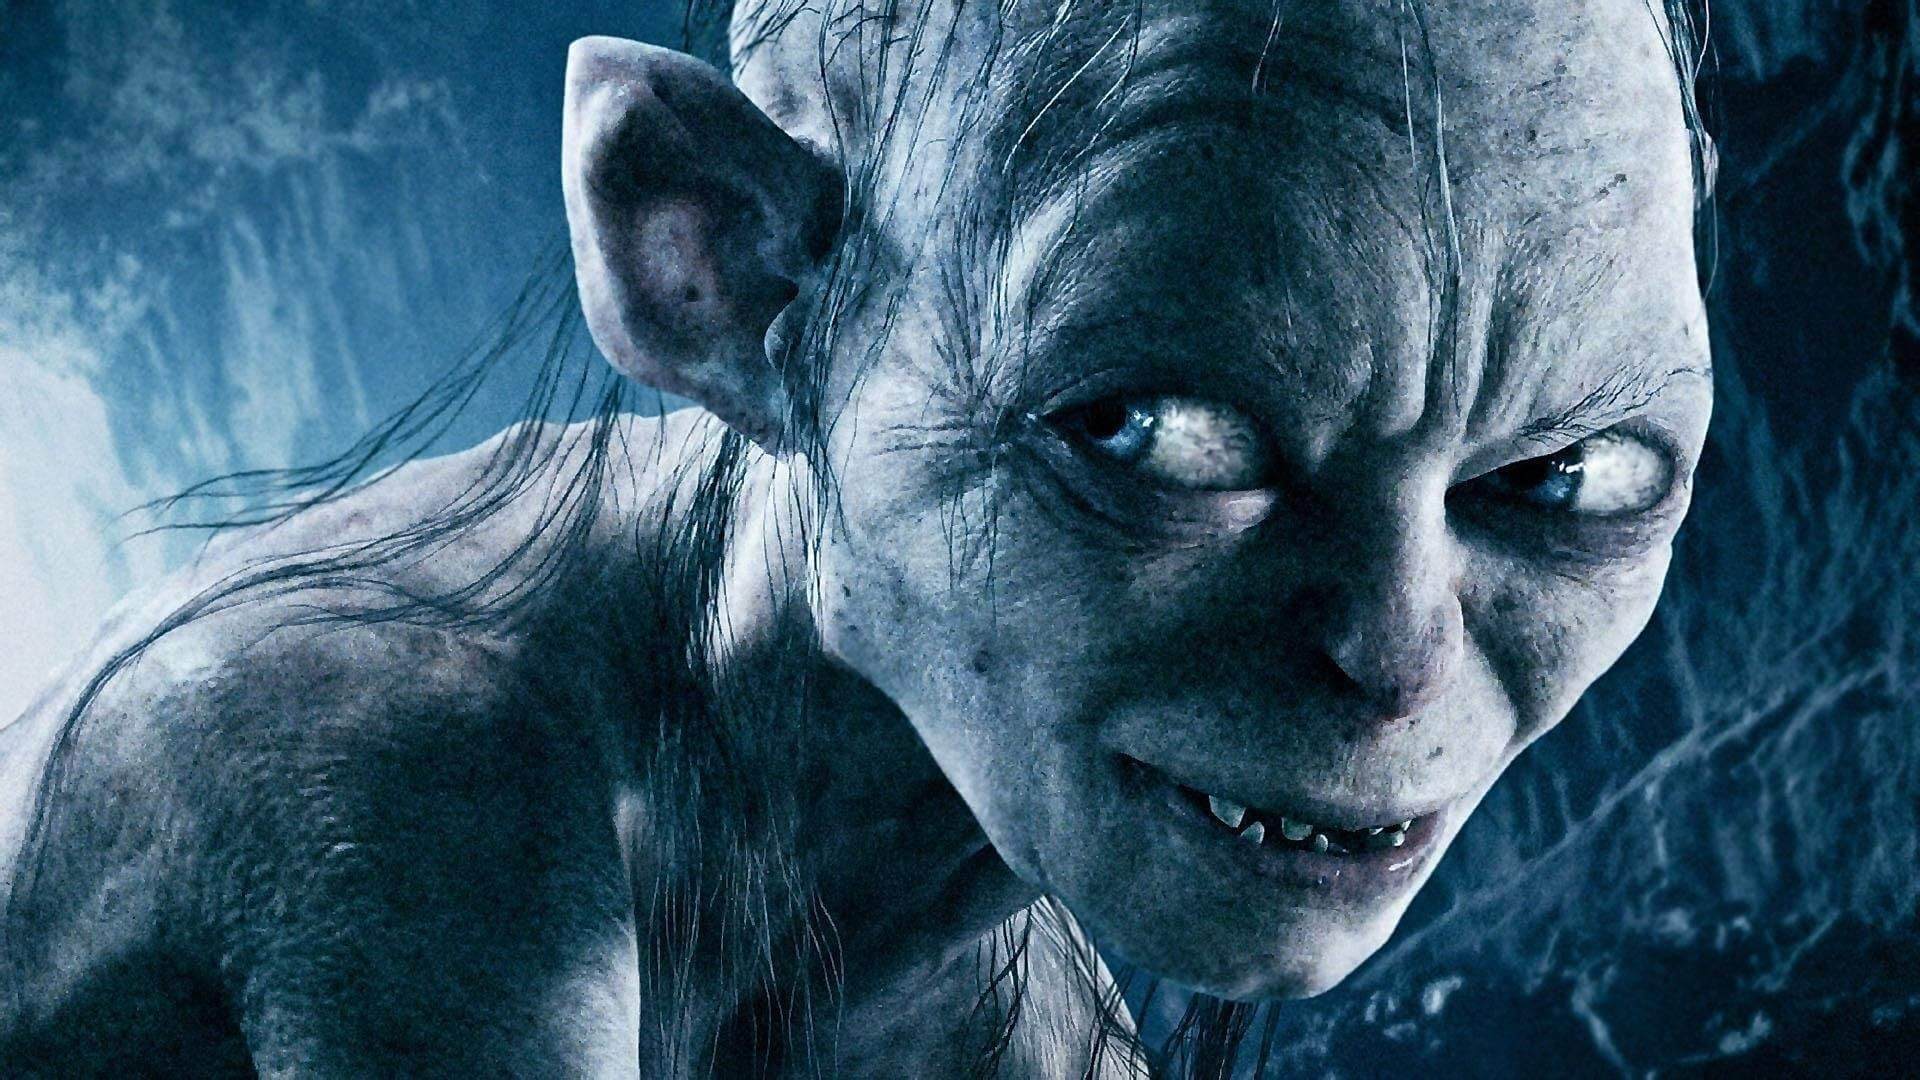 Lord of the Rings: Gollum Video Game Details Revealed